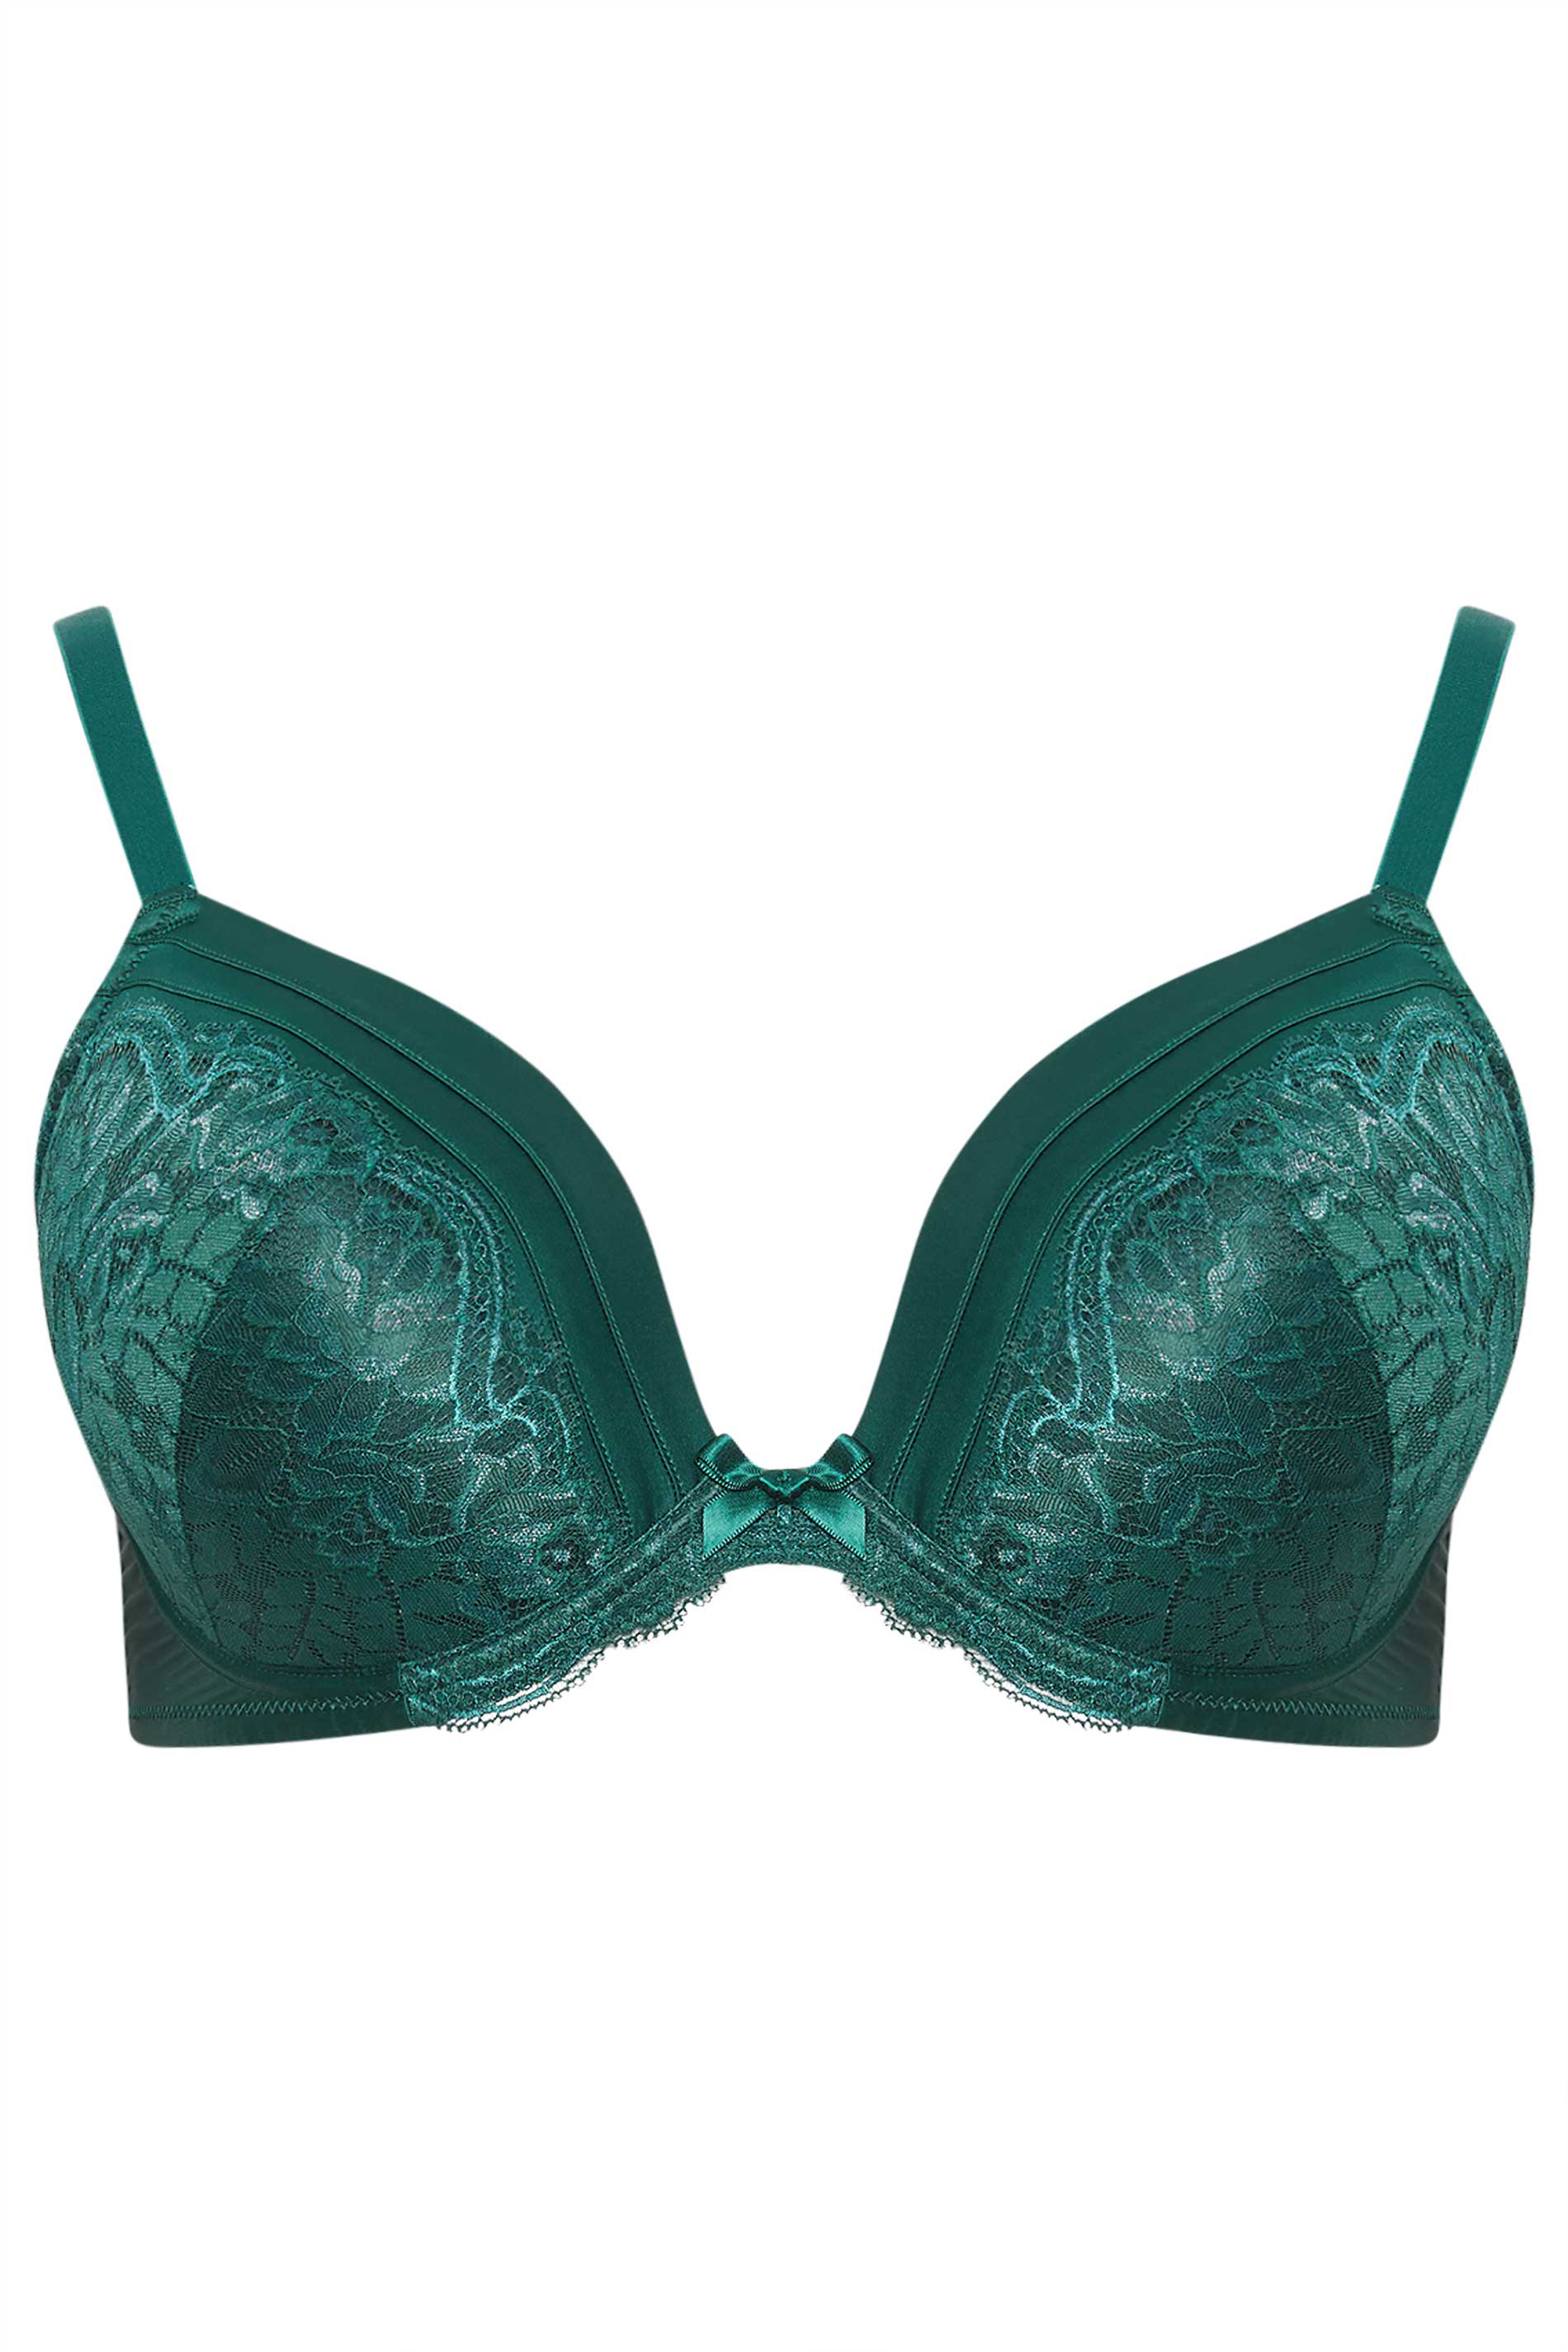 Plus Size YOURS Mint Green Lace Padded Underwired Bra